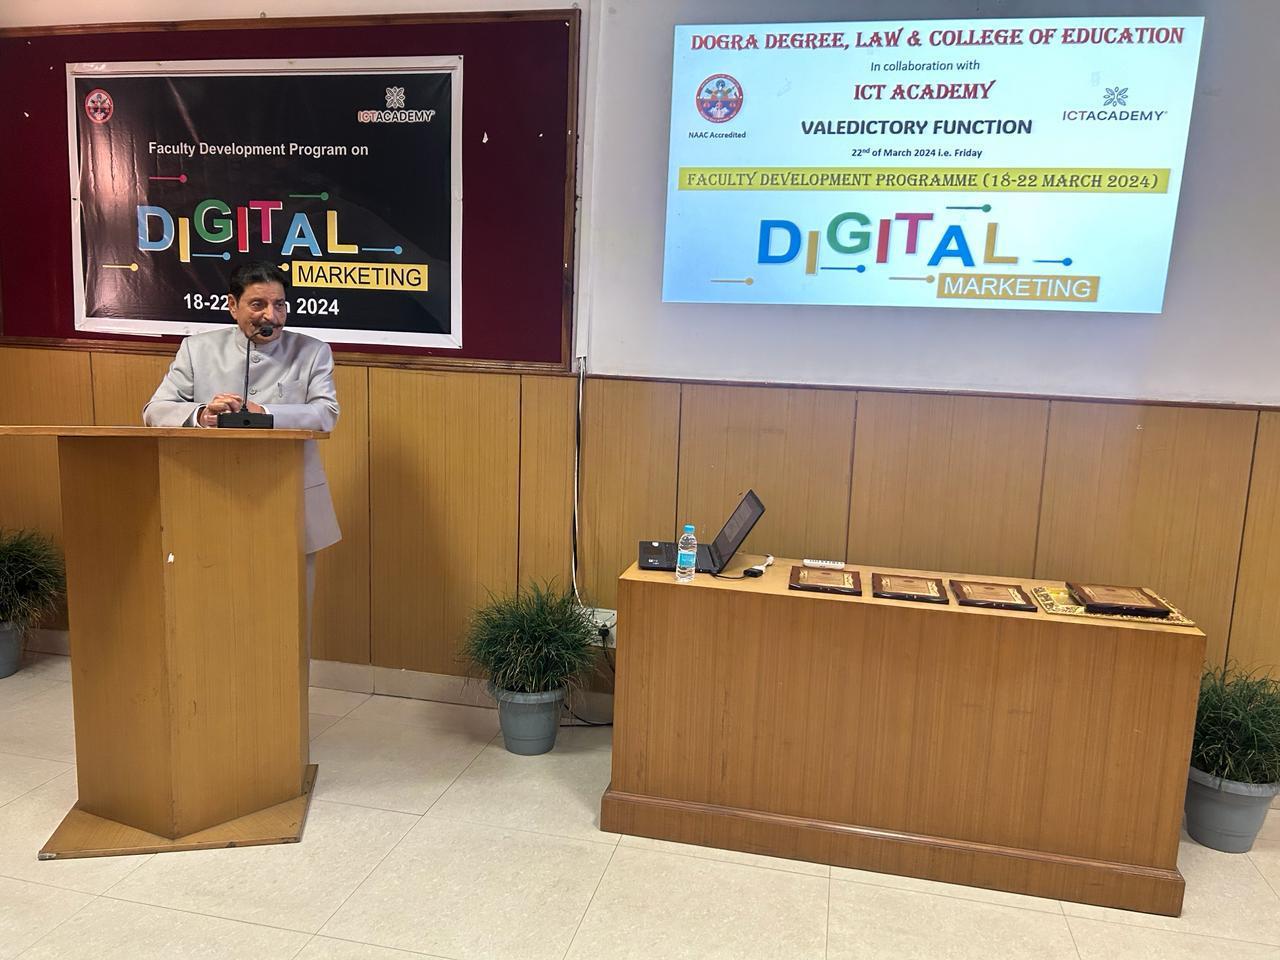 Dogra Degree, Law, and College of Education partnered with ICT Academy for a 5-day faculty development initiative focused on 